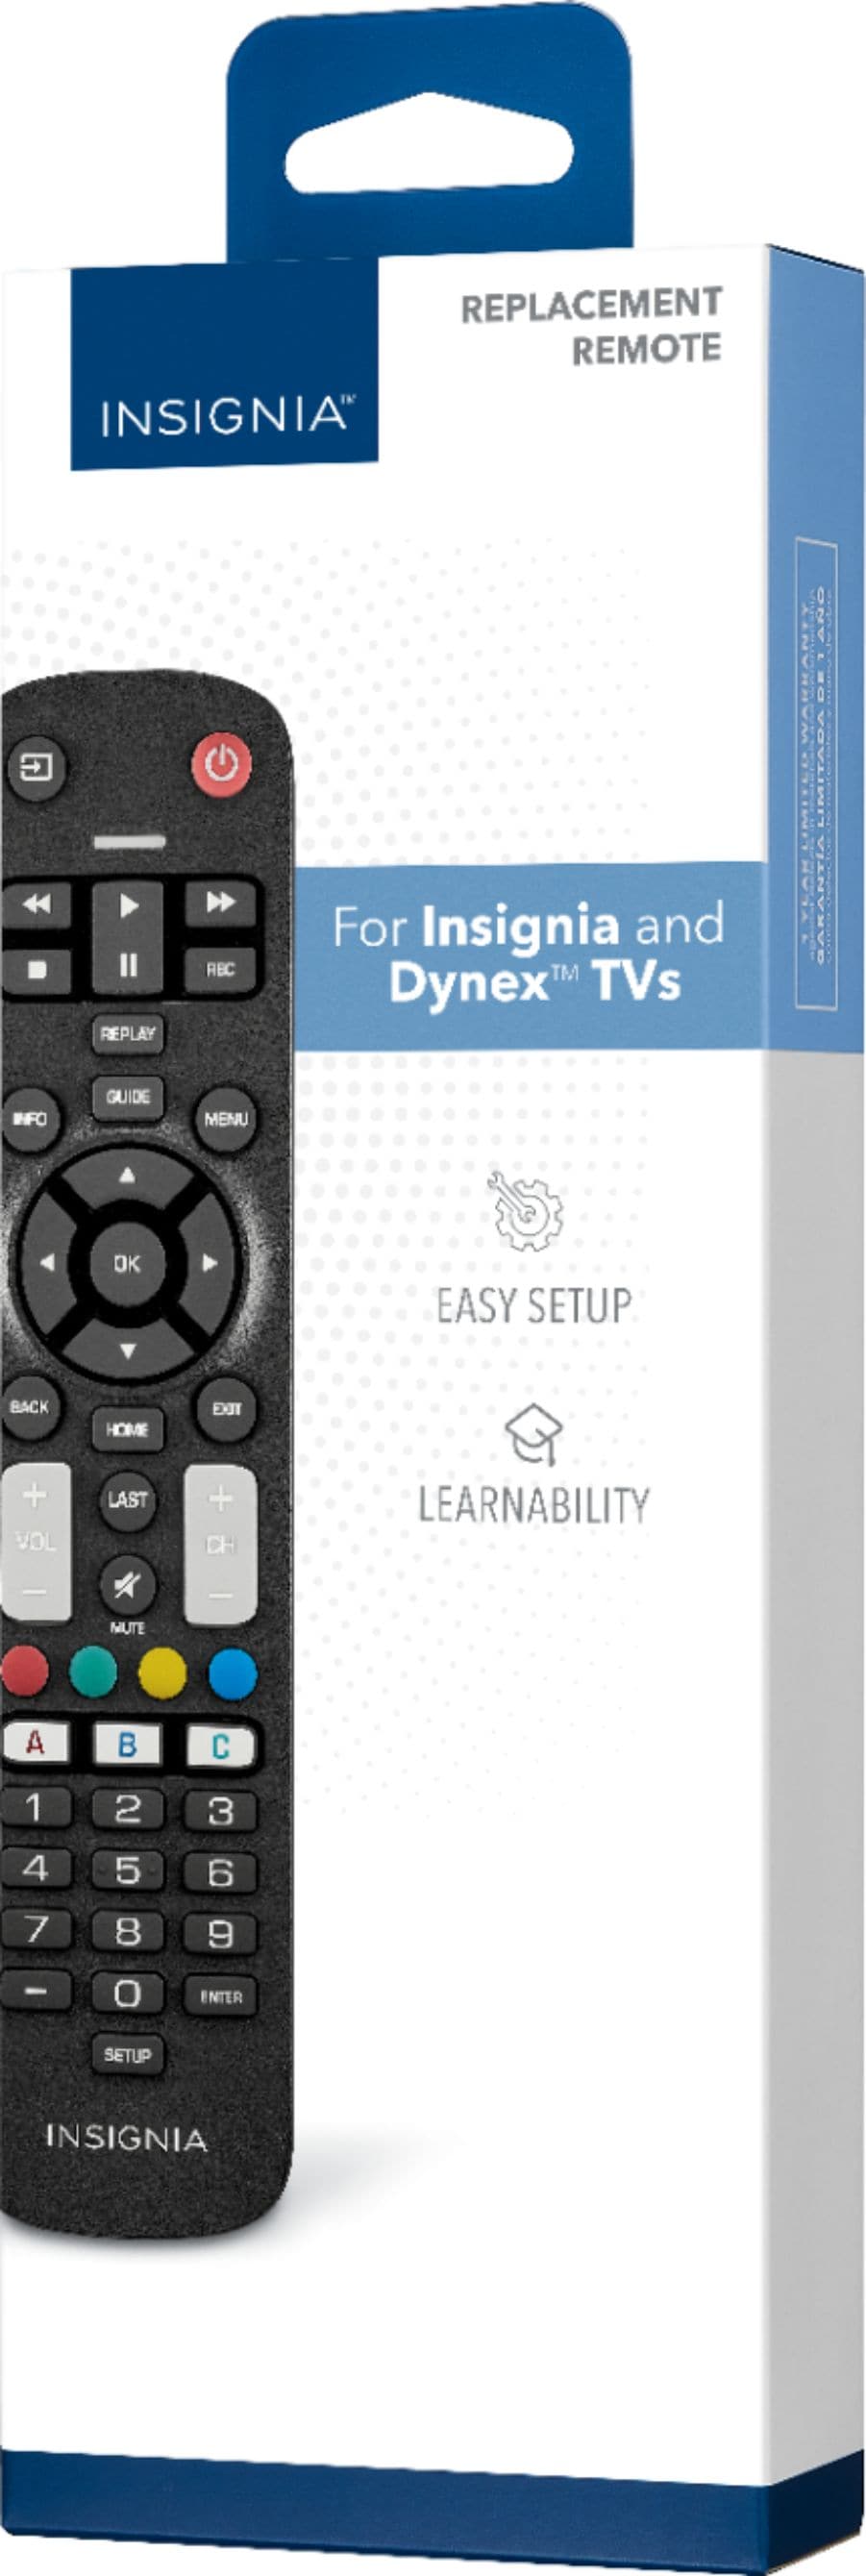 Insignia™ - Replacement Remote for Insignia and Dynex TVs - Black_1